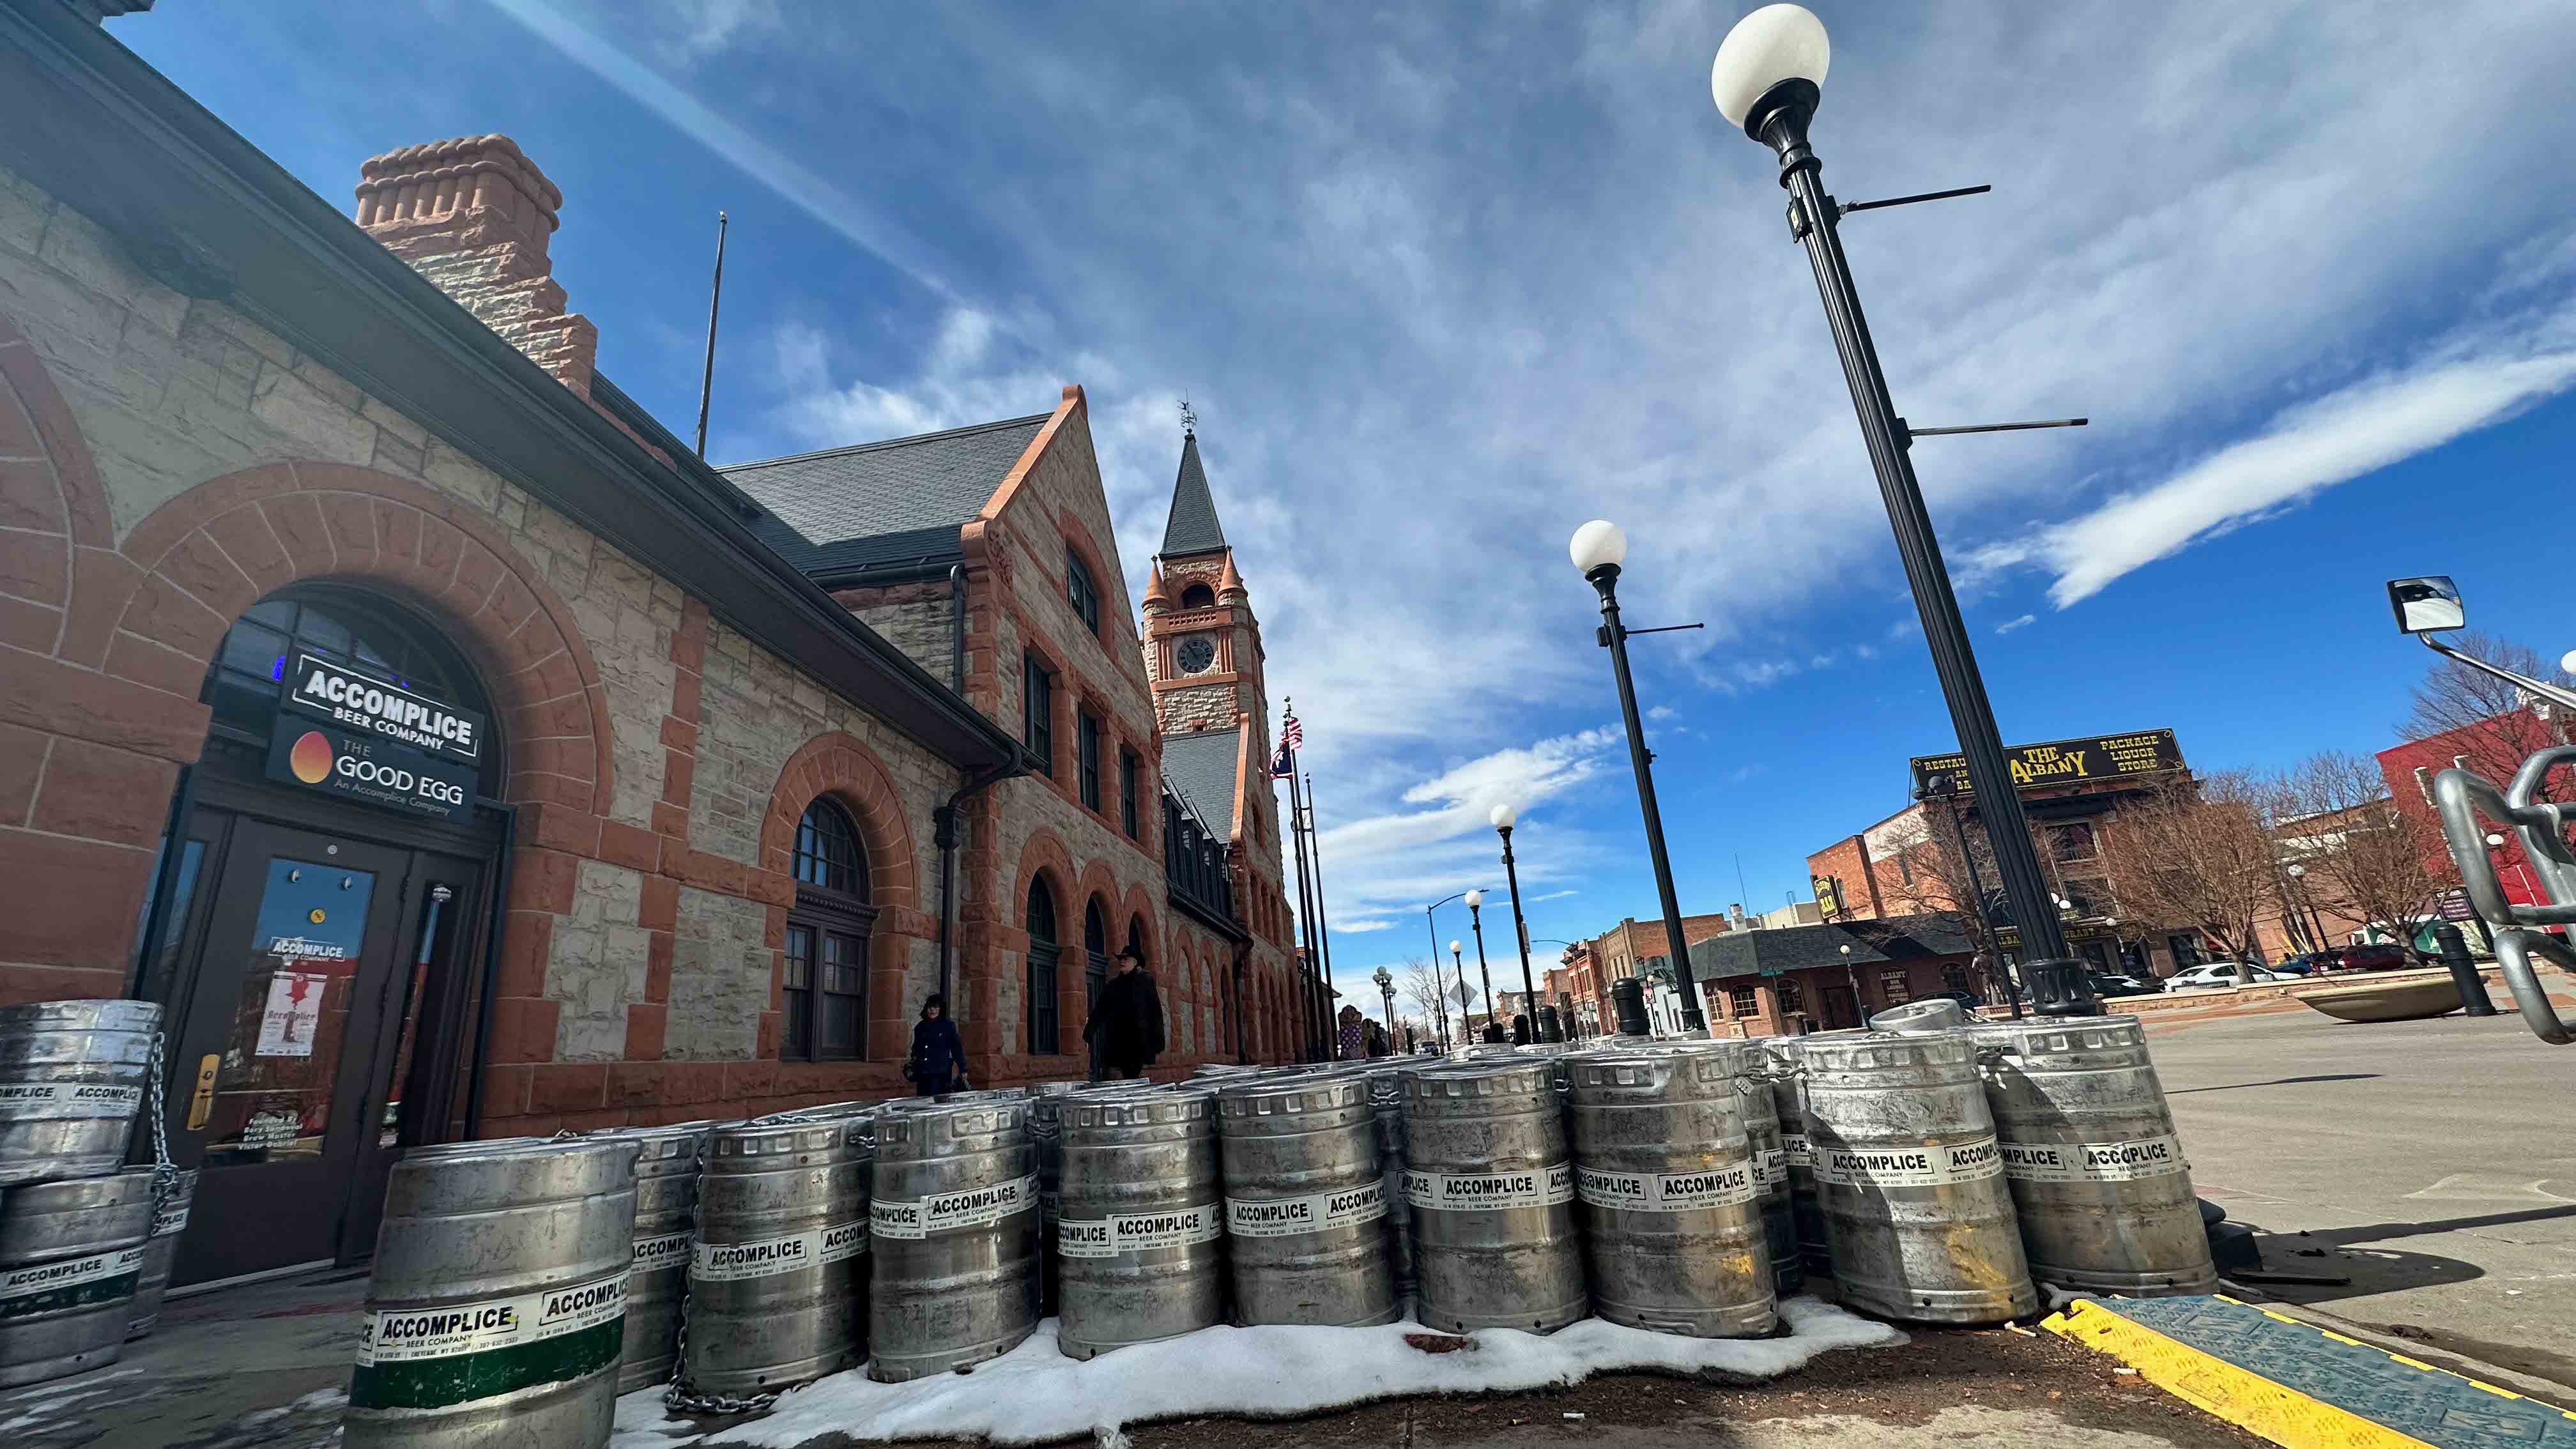 Accomplice Beer Company’s location in the historic Cheyenne Depot puts it at the center of everything, but results in some logistical challenges for its head brewer, such as needing to bring in bags of grain one-by-one.Photo Credit: Amber Leberman 